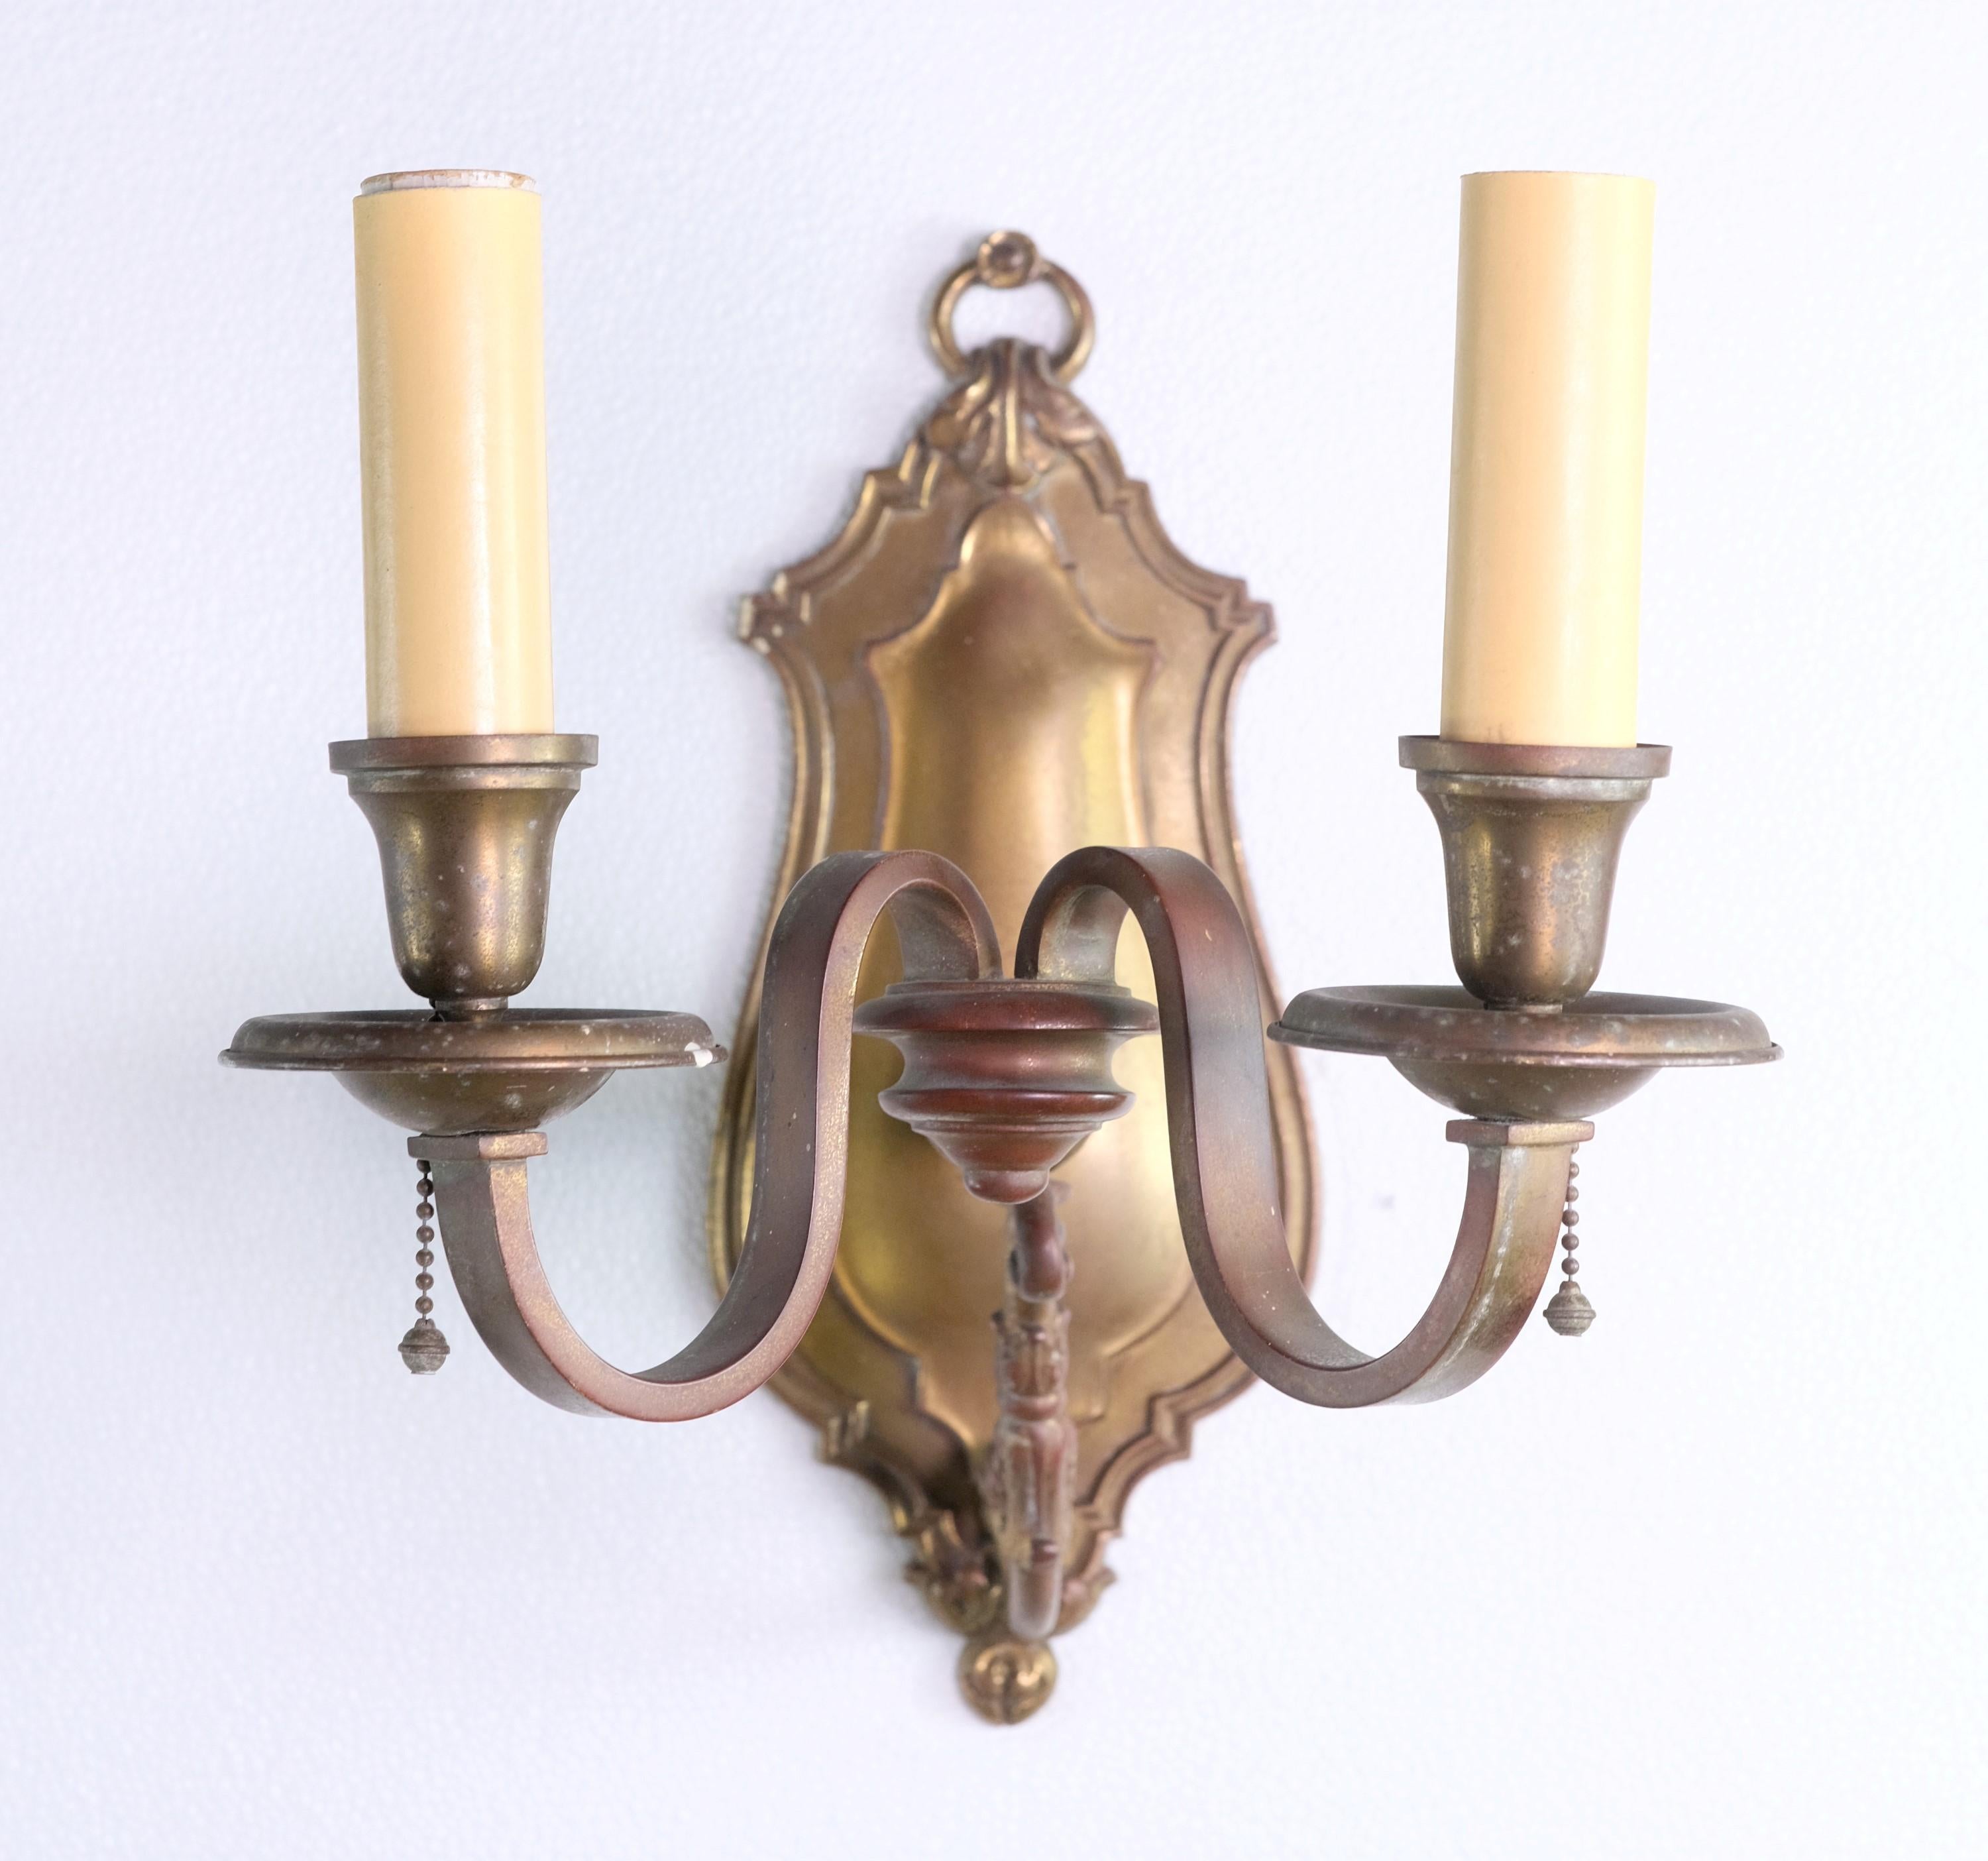 19th Century set of four bronze sconces with subtle foliage details and candlestick arms. They were reclaimed from The William Tilden Estate. There is a natural patina and are well preserved. Priced as a set of four. Price includes restoration.